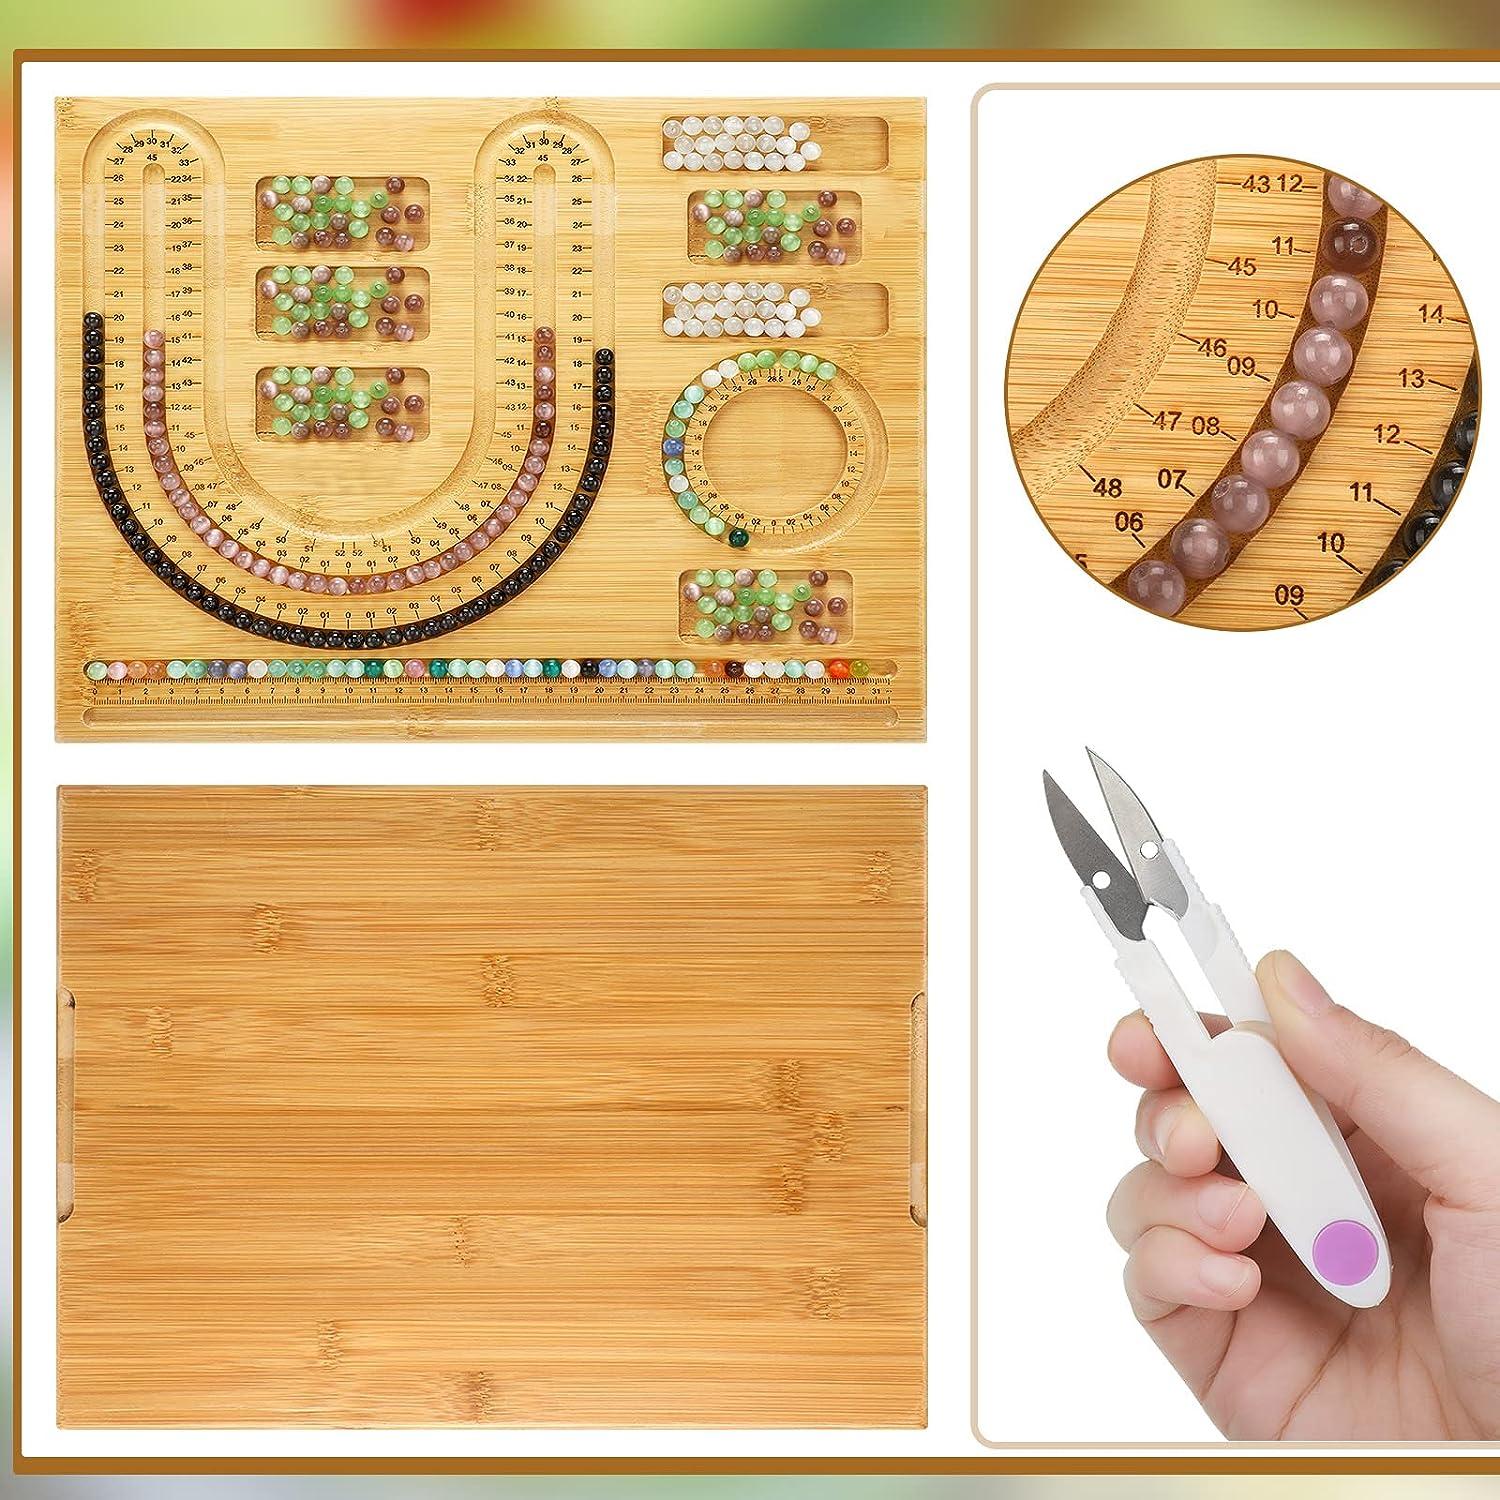 Jutom Bead Design Boards Bead Measuring Board Jewelry Design Mats Beading  Needles Jewelry String for DIY Bracelets Necklaces Craft Supplies Tools Jewelry  Making